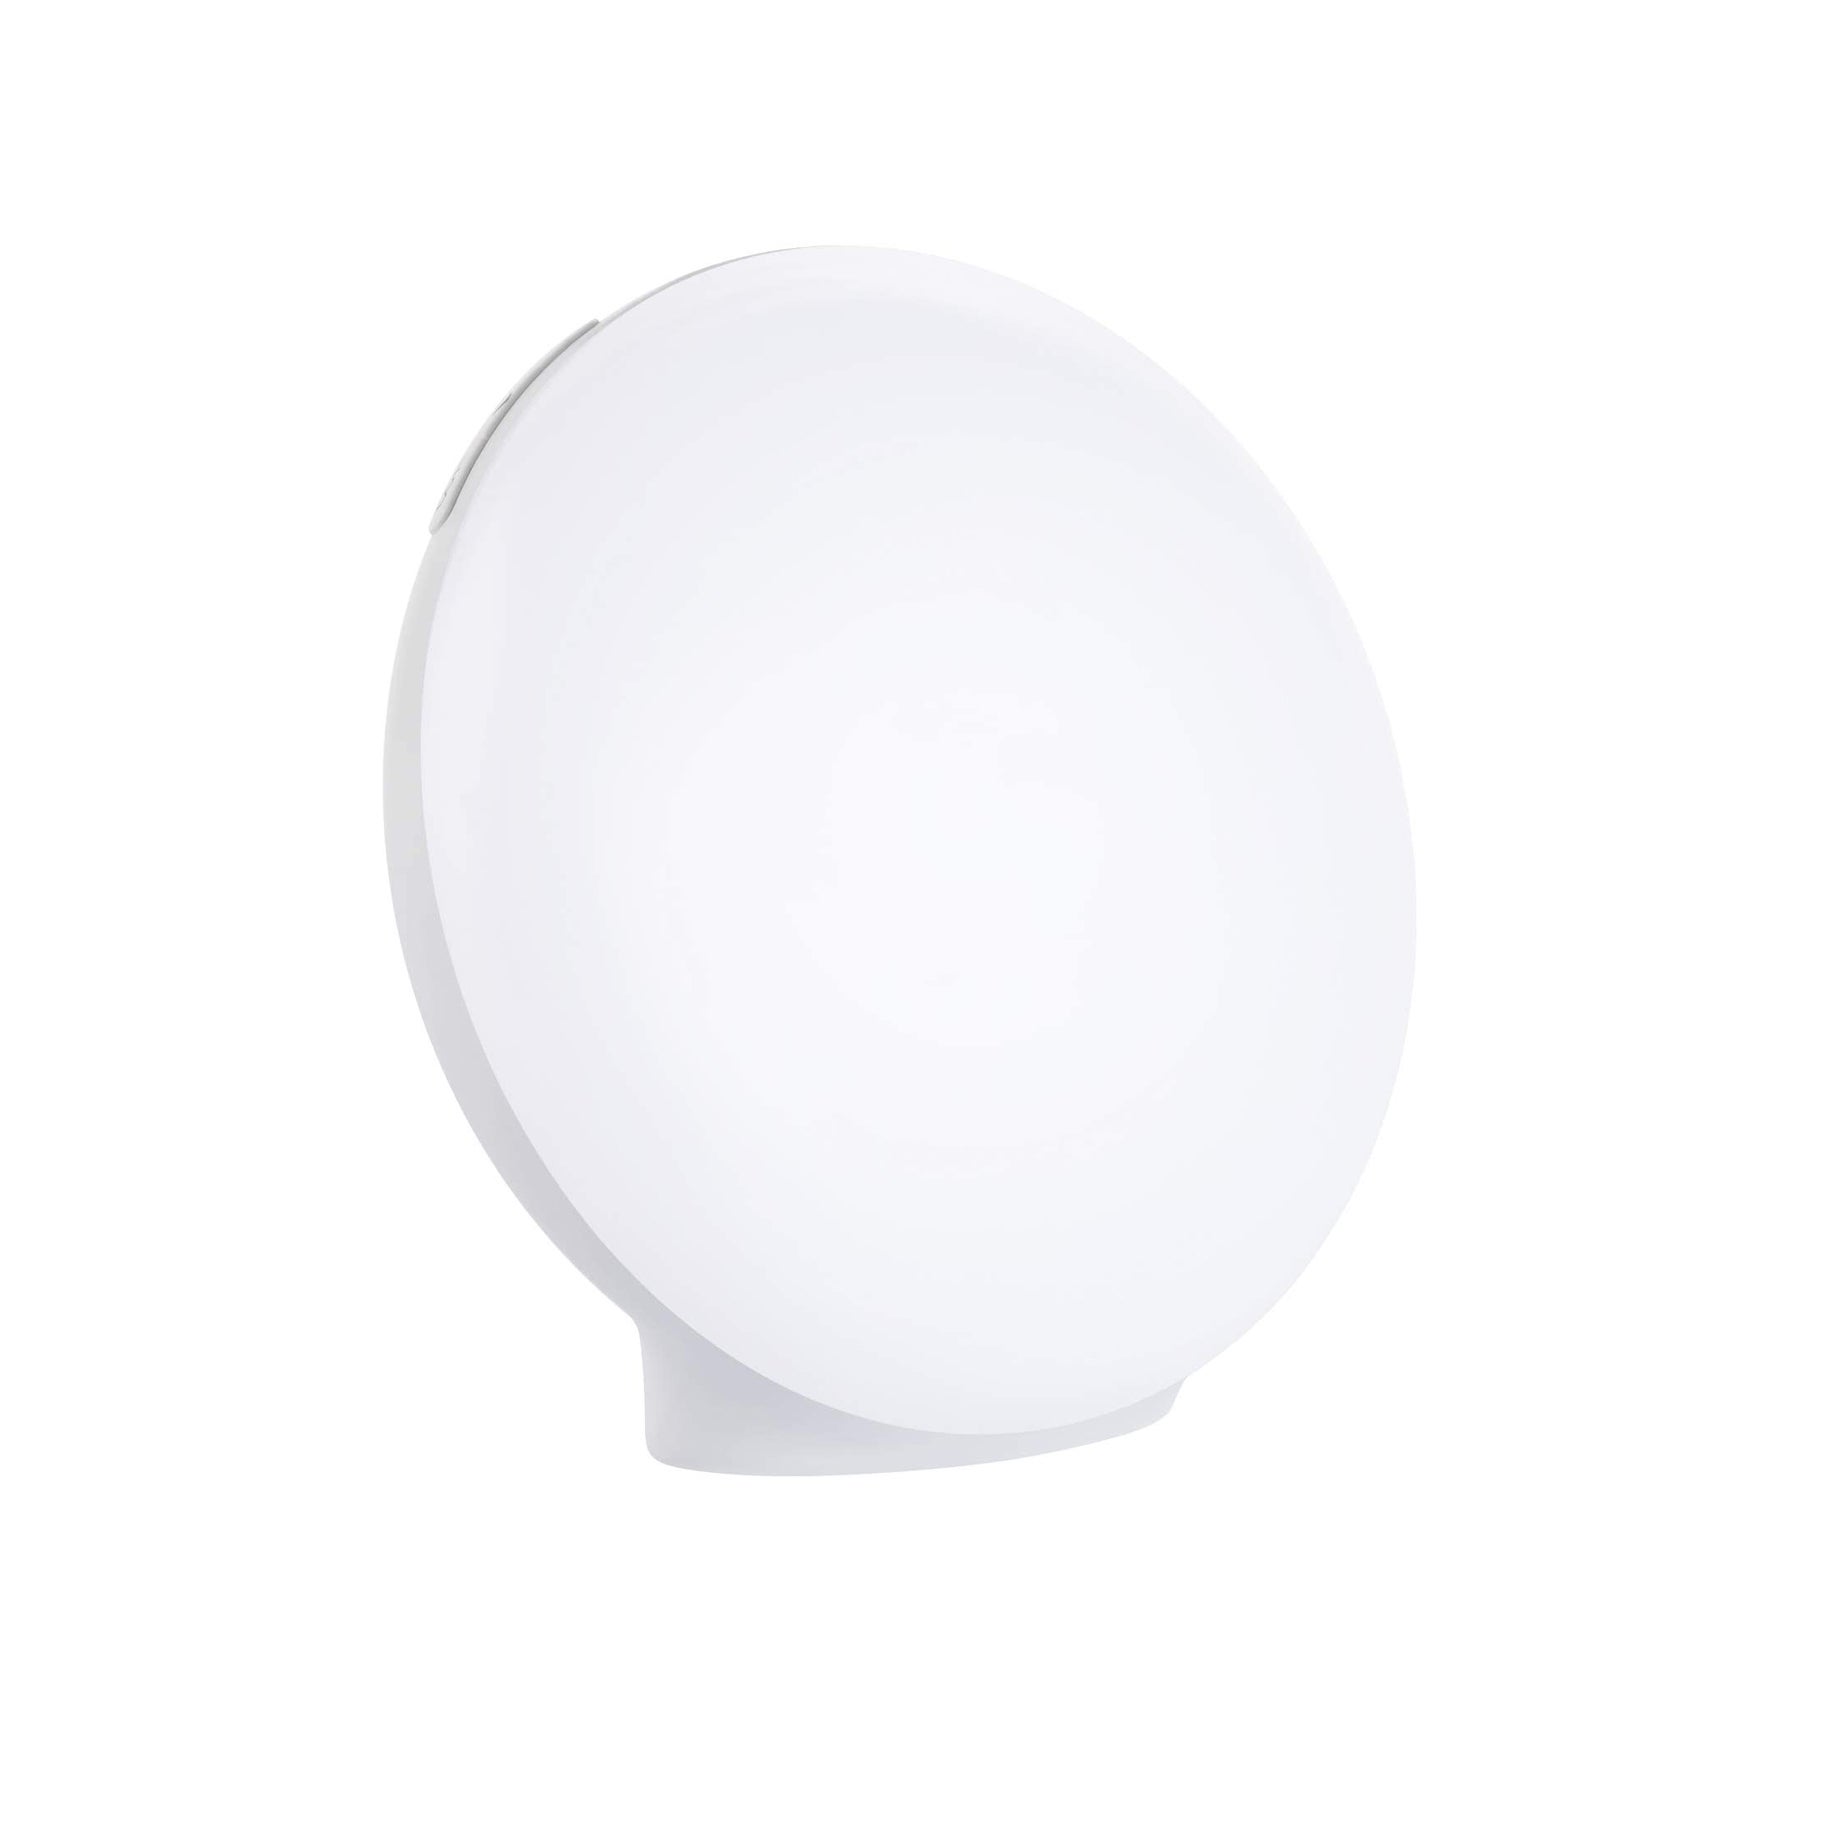 The Best Light Therapy Lamp Option YeeBright Light Therapy Lamp